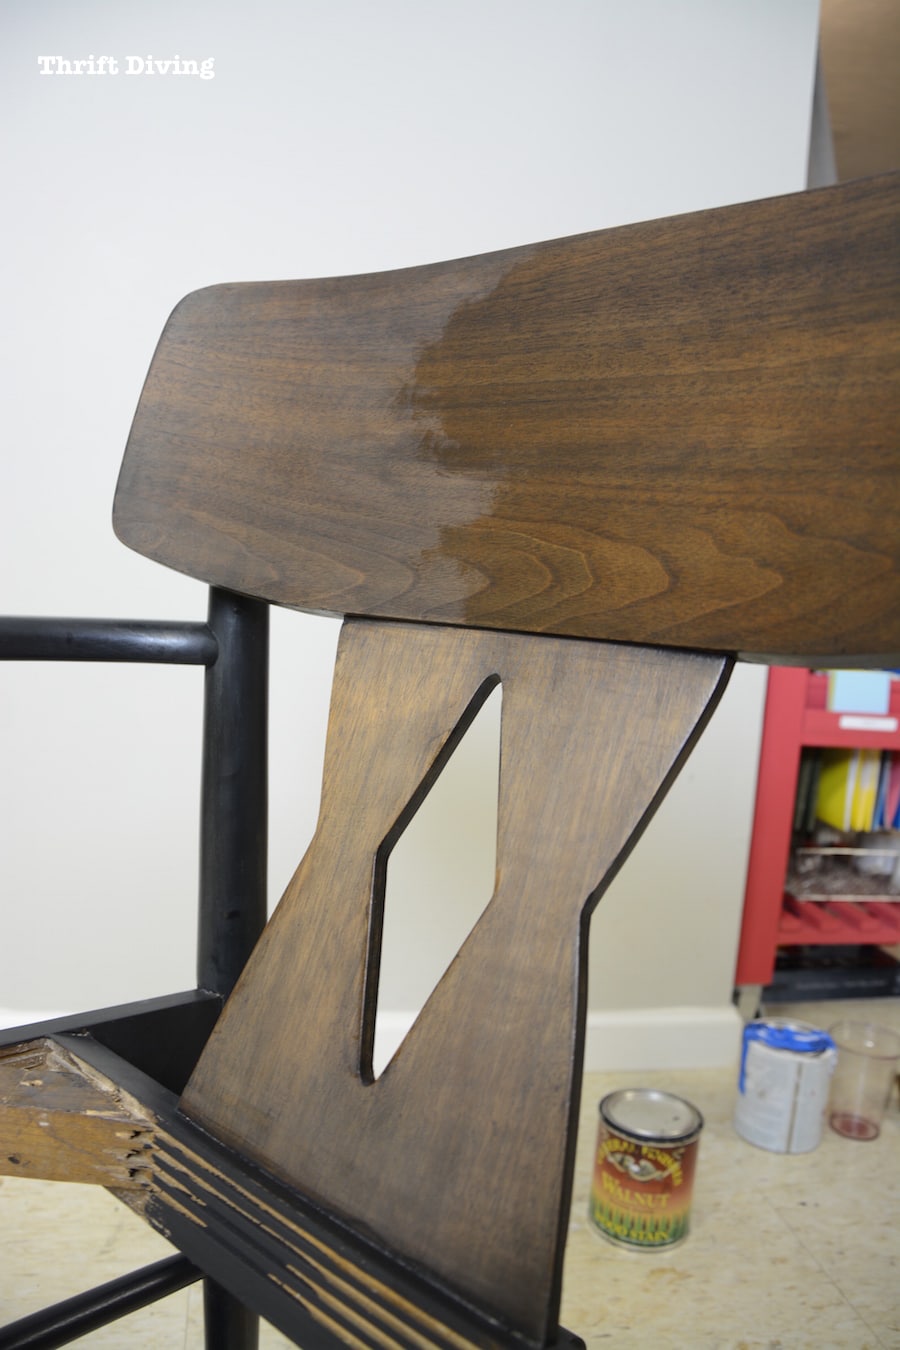 Mid-century modern chair makeover - Using tung oil - Thrift Diving